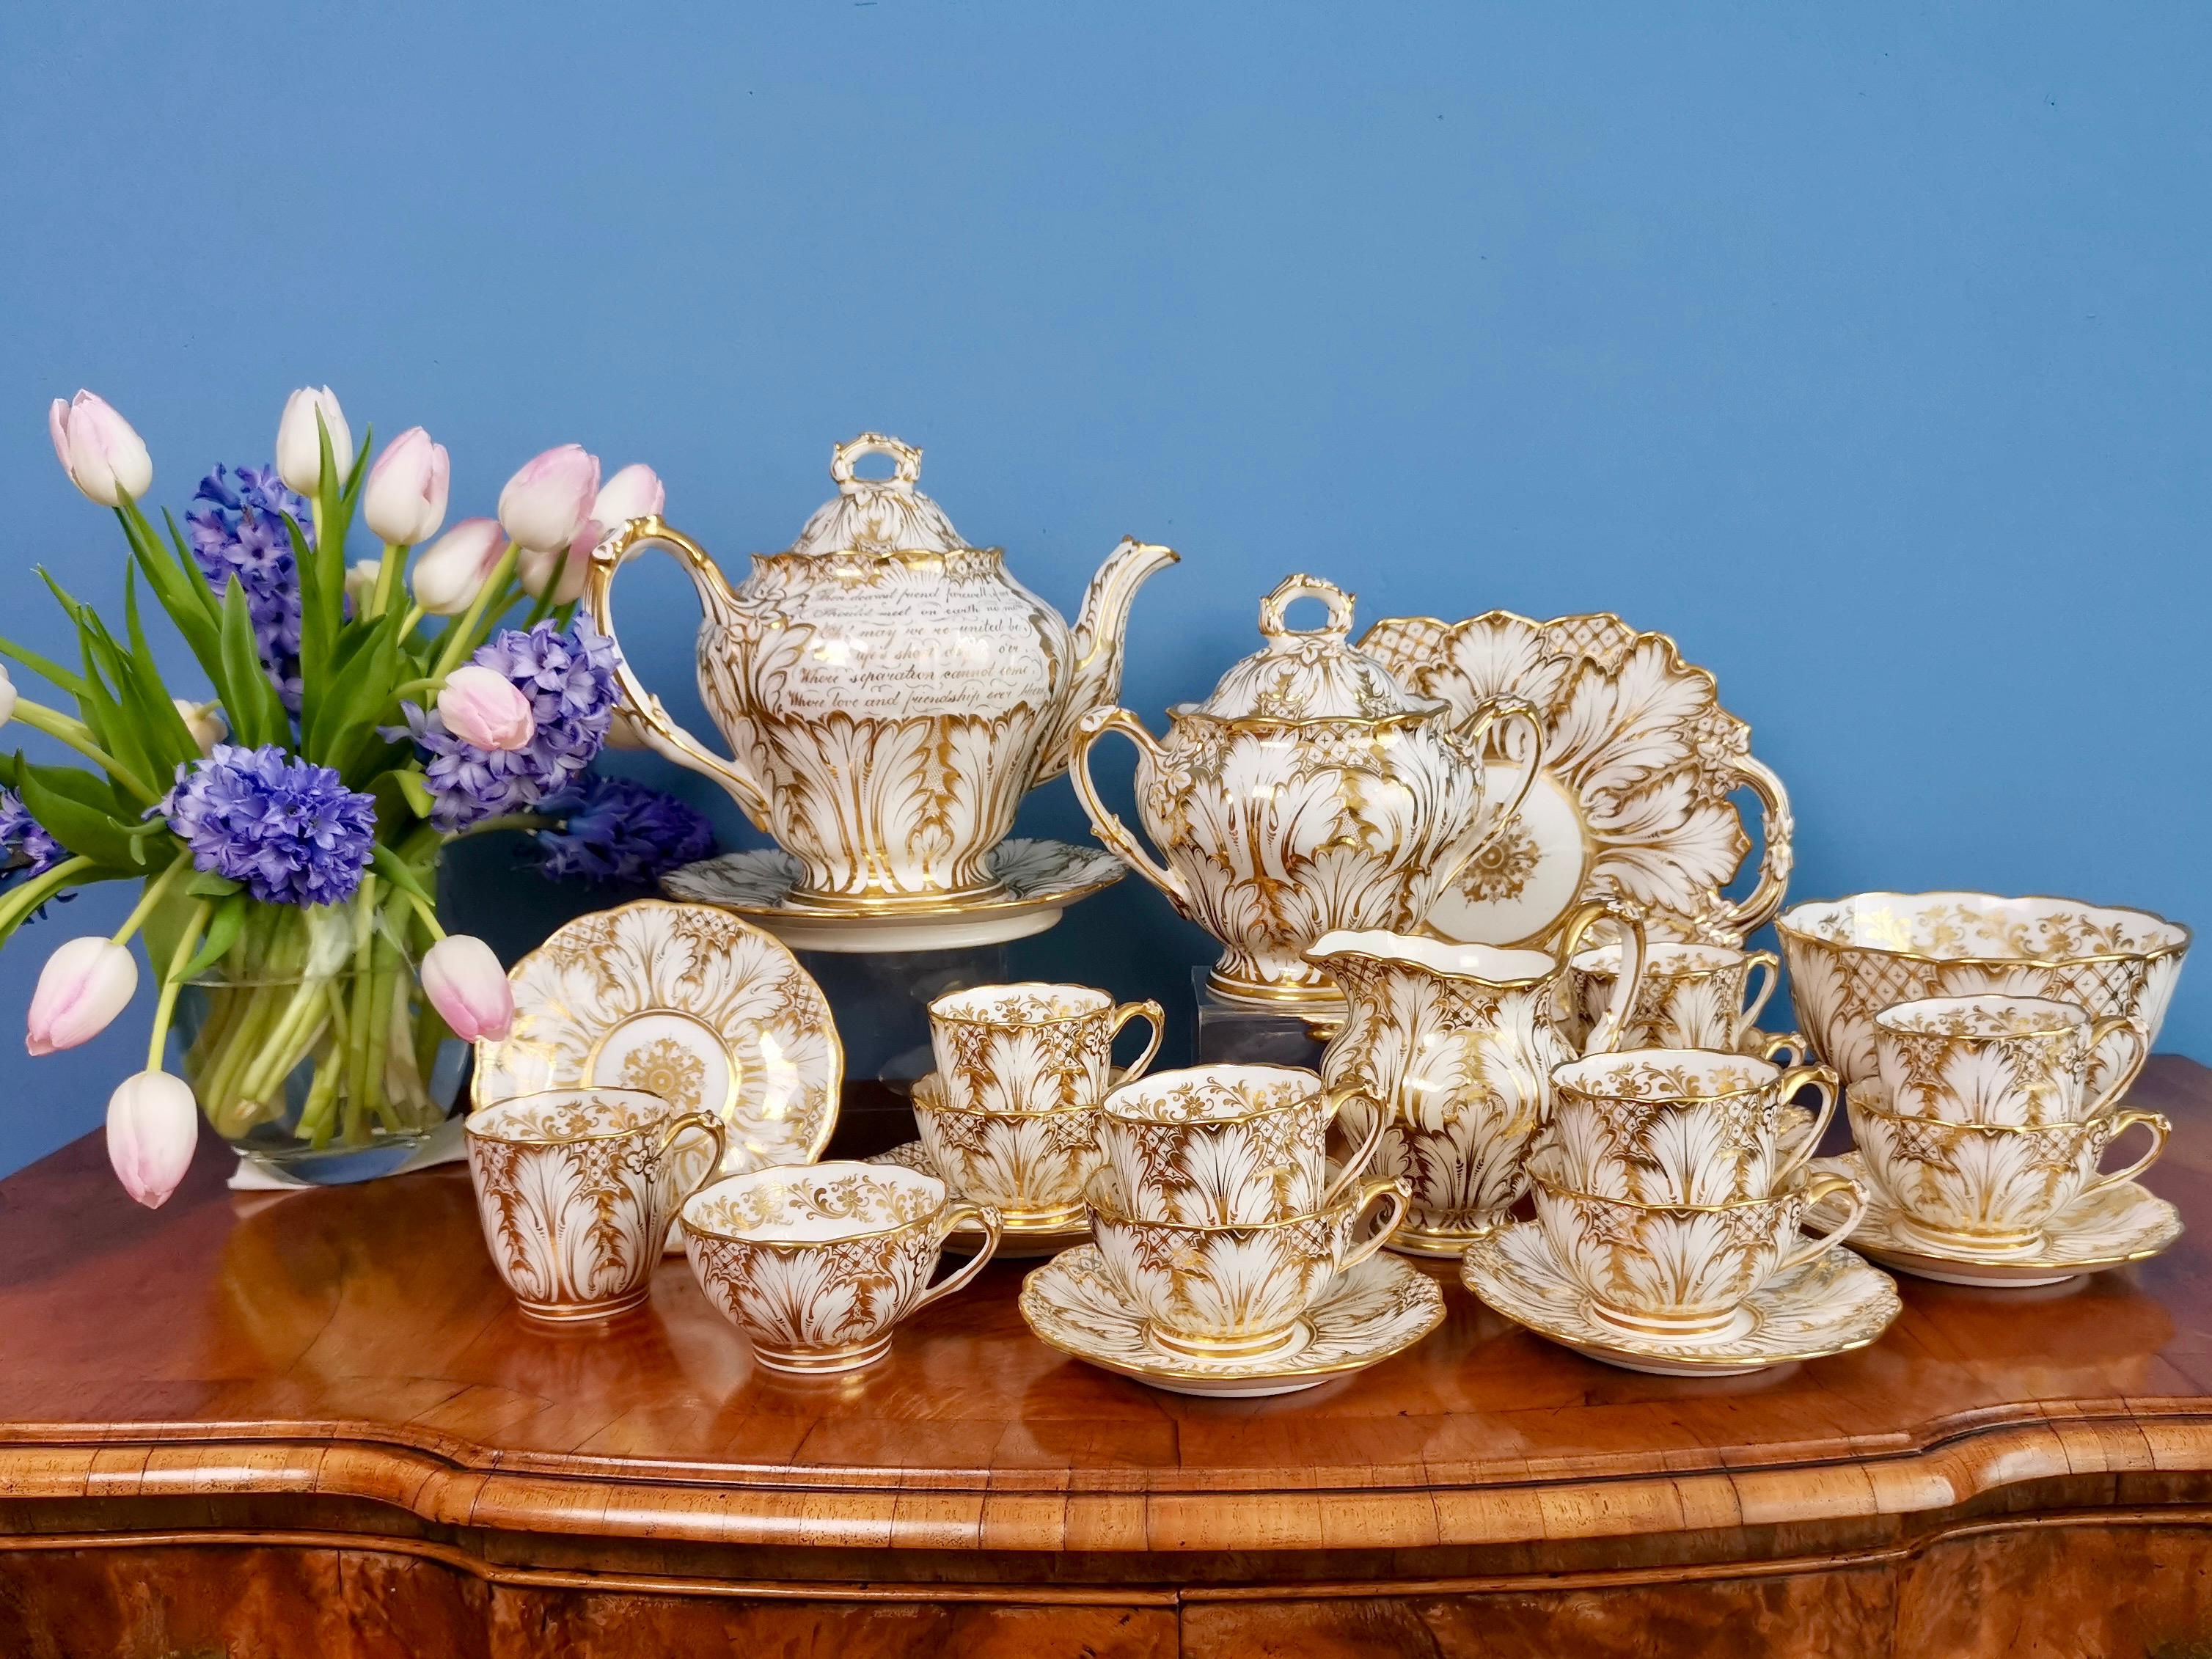 This is an absolutely stunning tea service made in 1853 by Ridgway. The service consists of a teapot with cover on a stand, a sucrier with cover, a milk jug, a slop bowl, a large cake plates and six true trios, each consisting of a teacup, a coffee